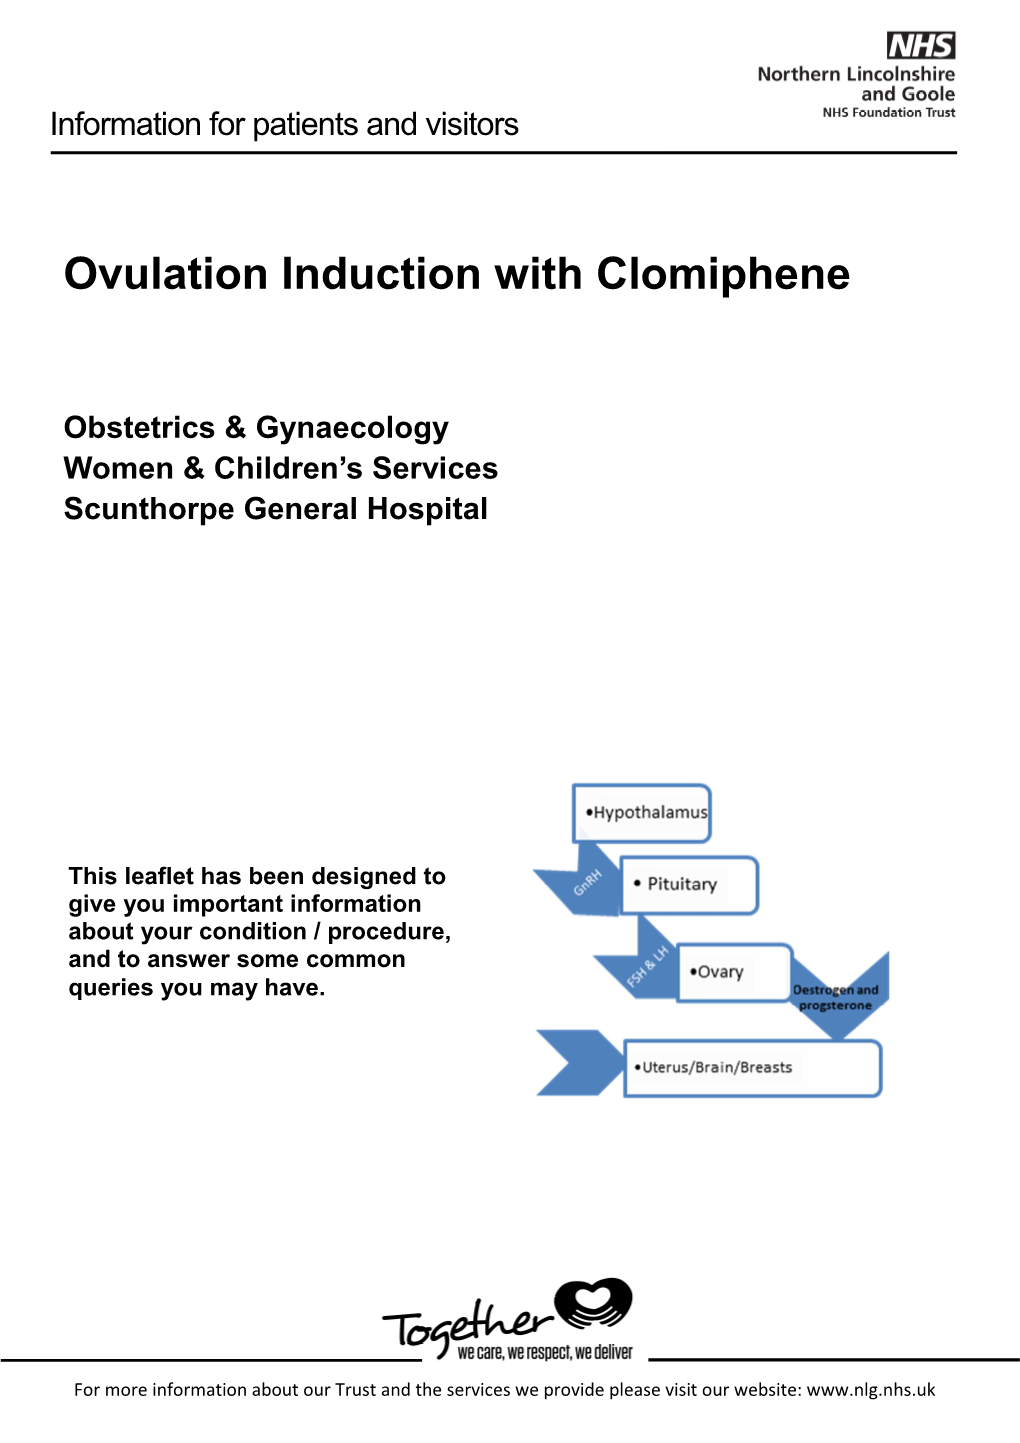 Ovulation Induction with Clomiphene